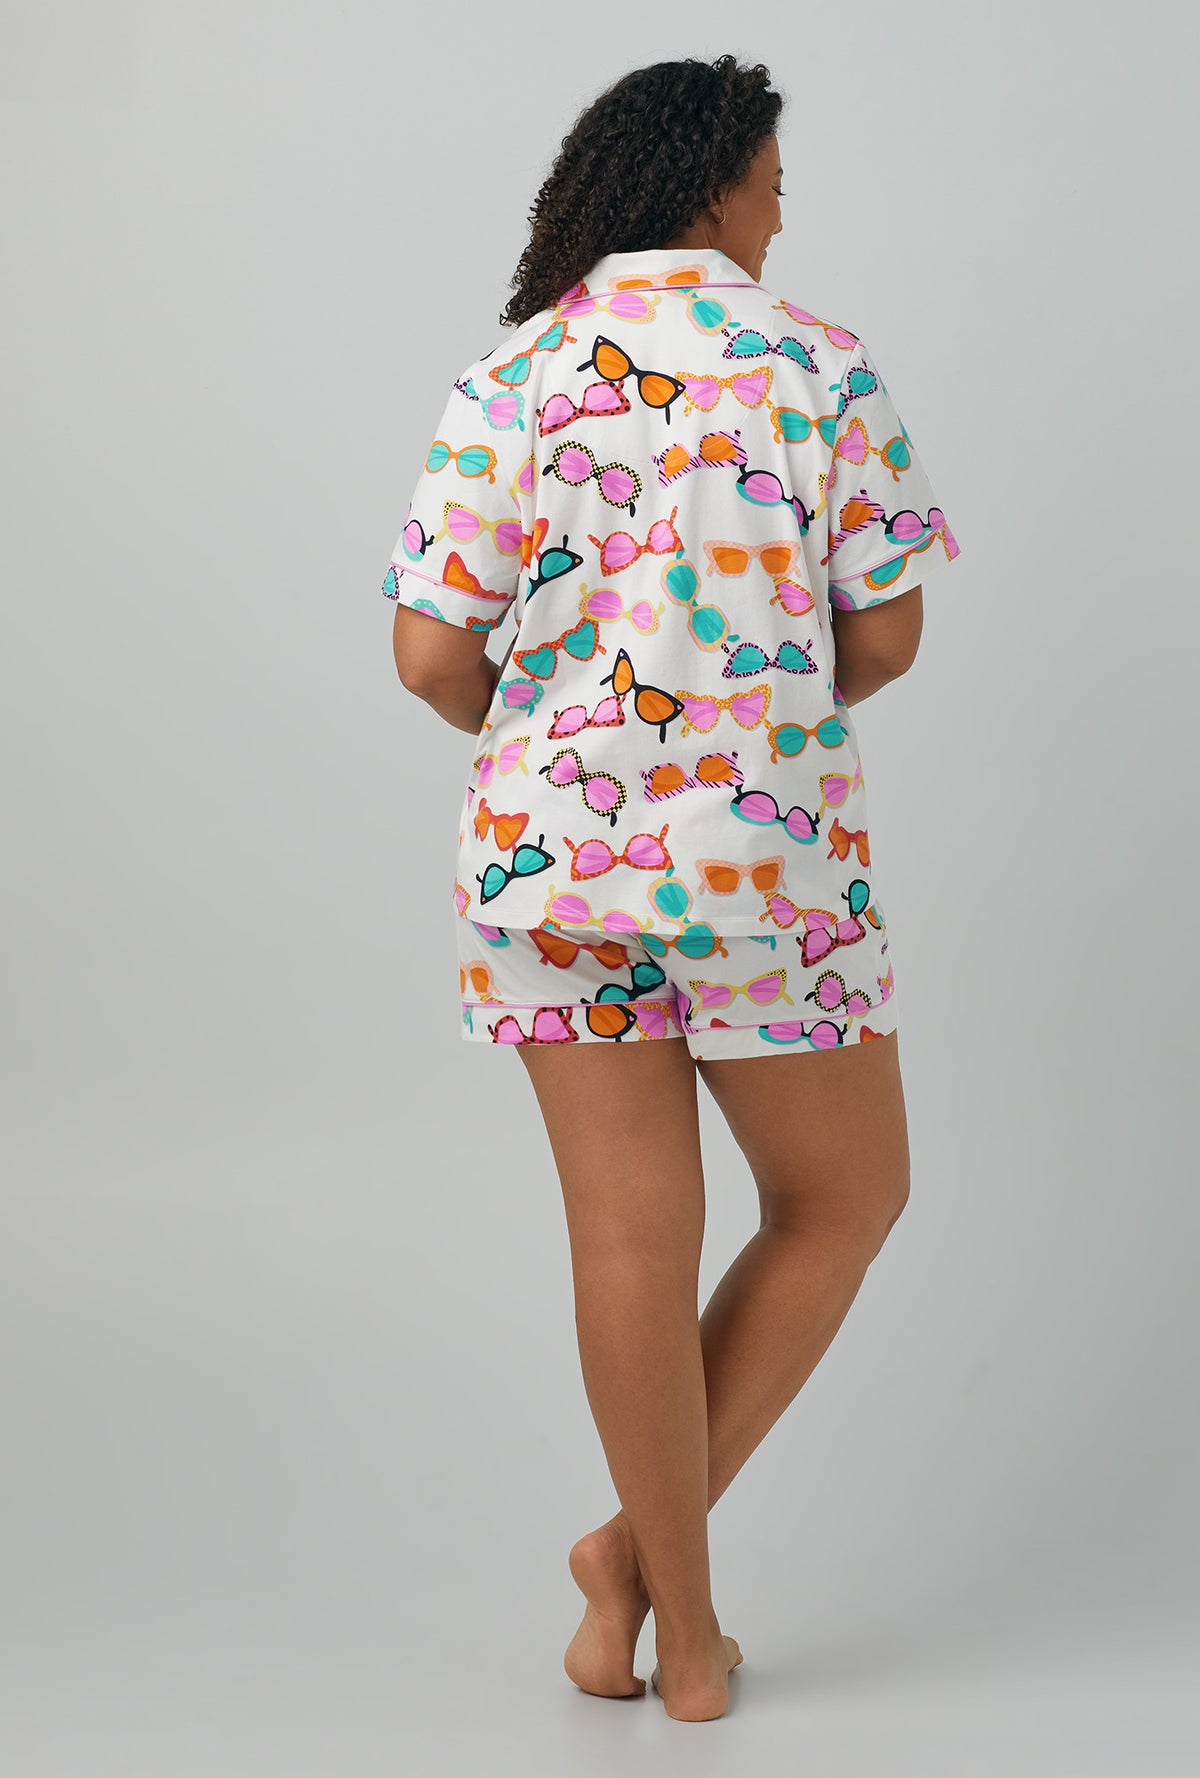 A lady wearing plus size multi color Short Sleeve Classic Shorty Stretch Jersey PJ Set with Sunny Lens print